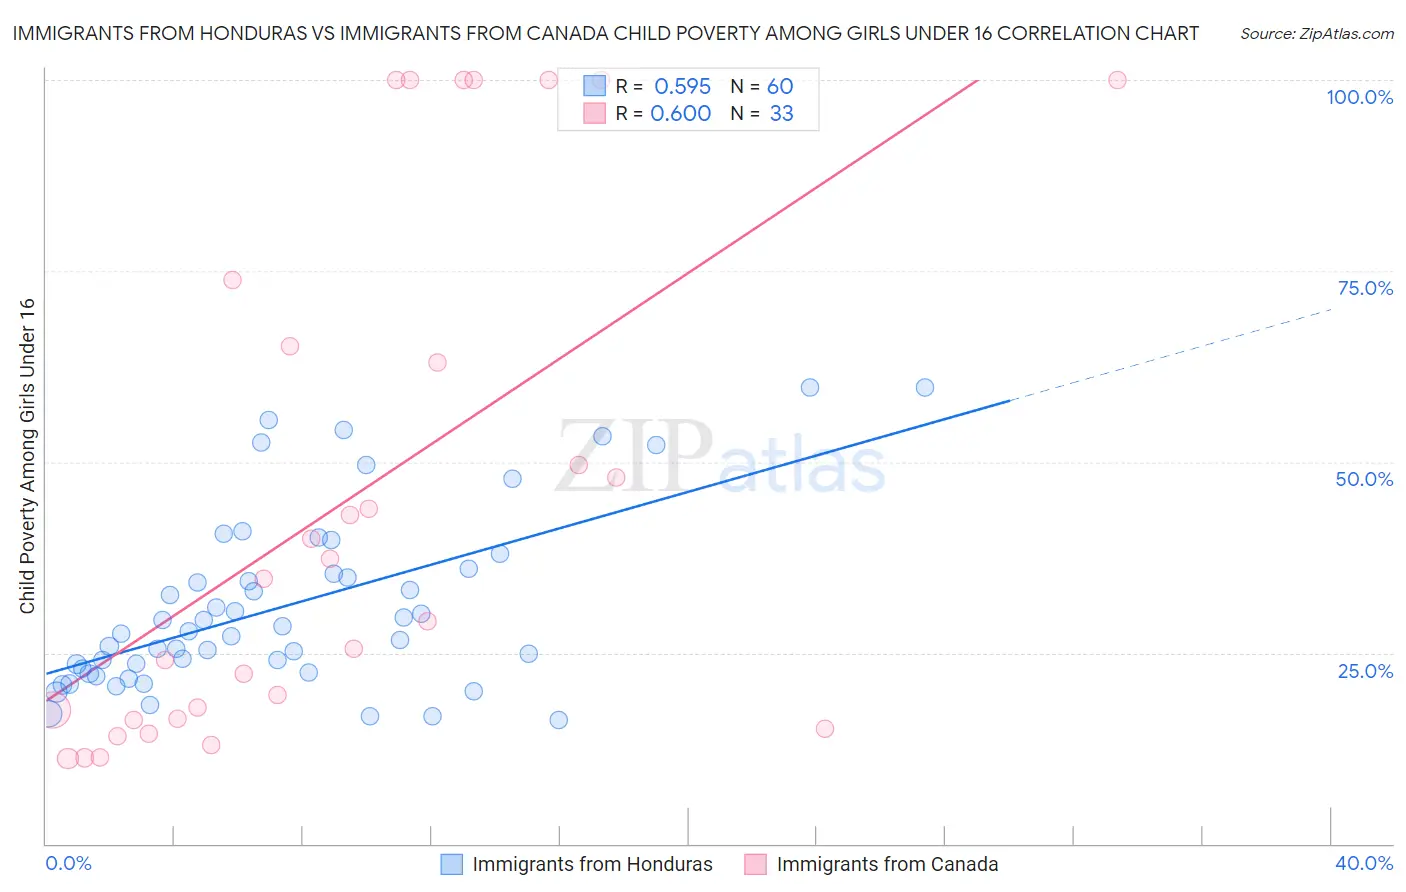 Immigrants from Honduras vs Immigrants from Canada Child Poverty Among Girls Under 16